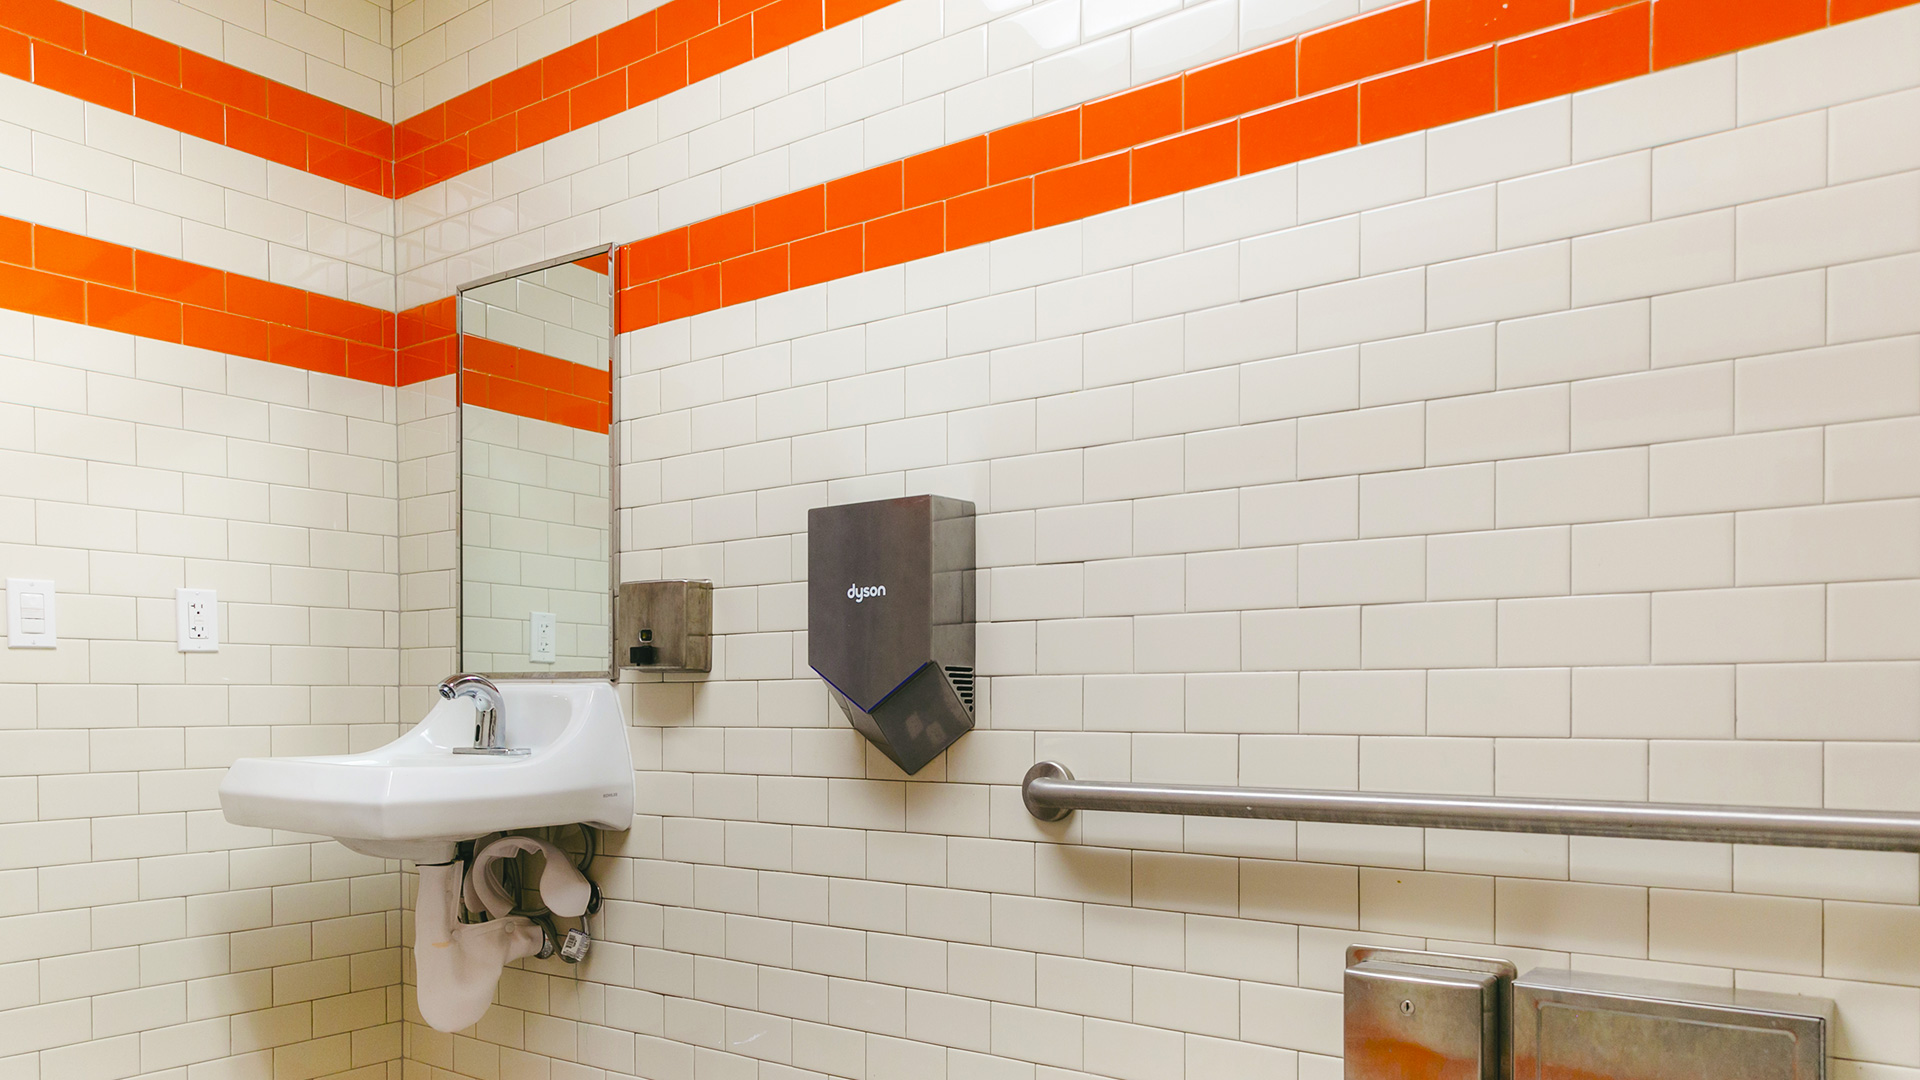 Portable restroom interior, with white and orange tiles.